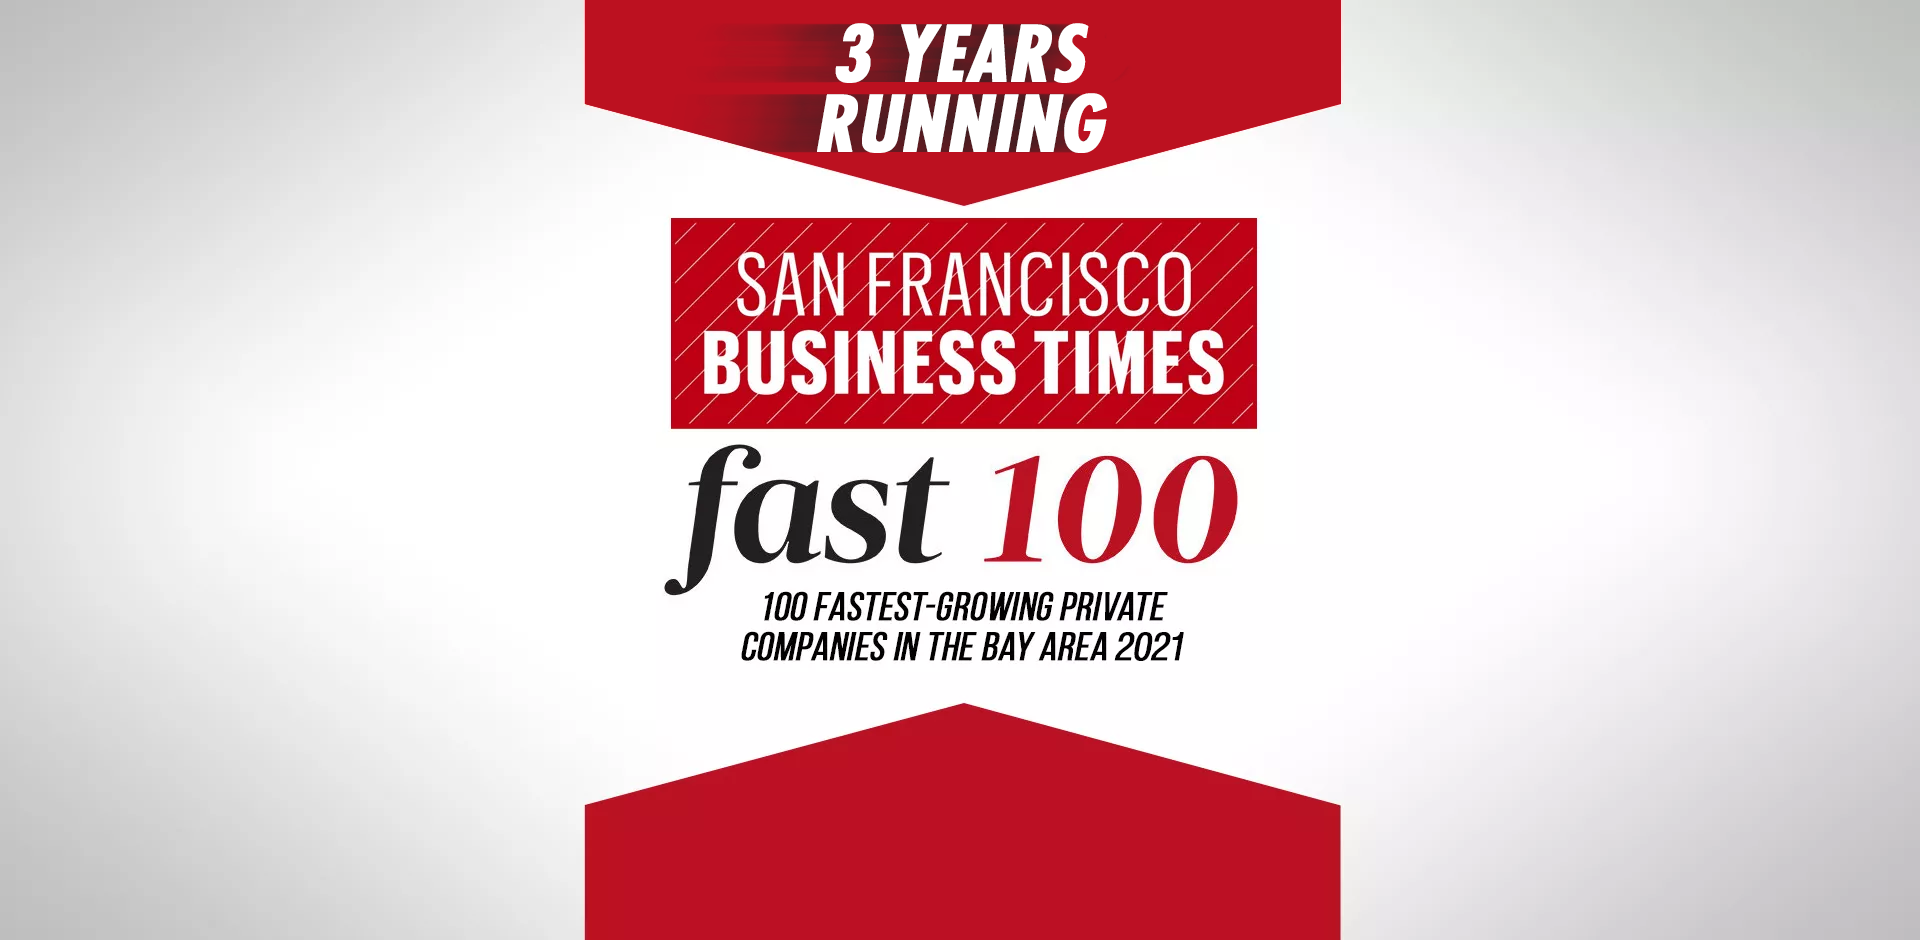 Consumer Acquisition Appears on the San Francisco Business Times Fast 100 list of Fastest-Growing Private Companies for 3rd Consecutive Year